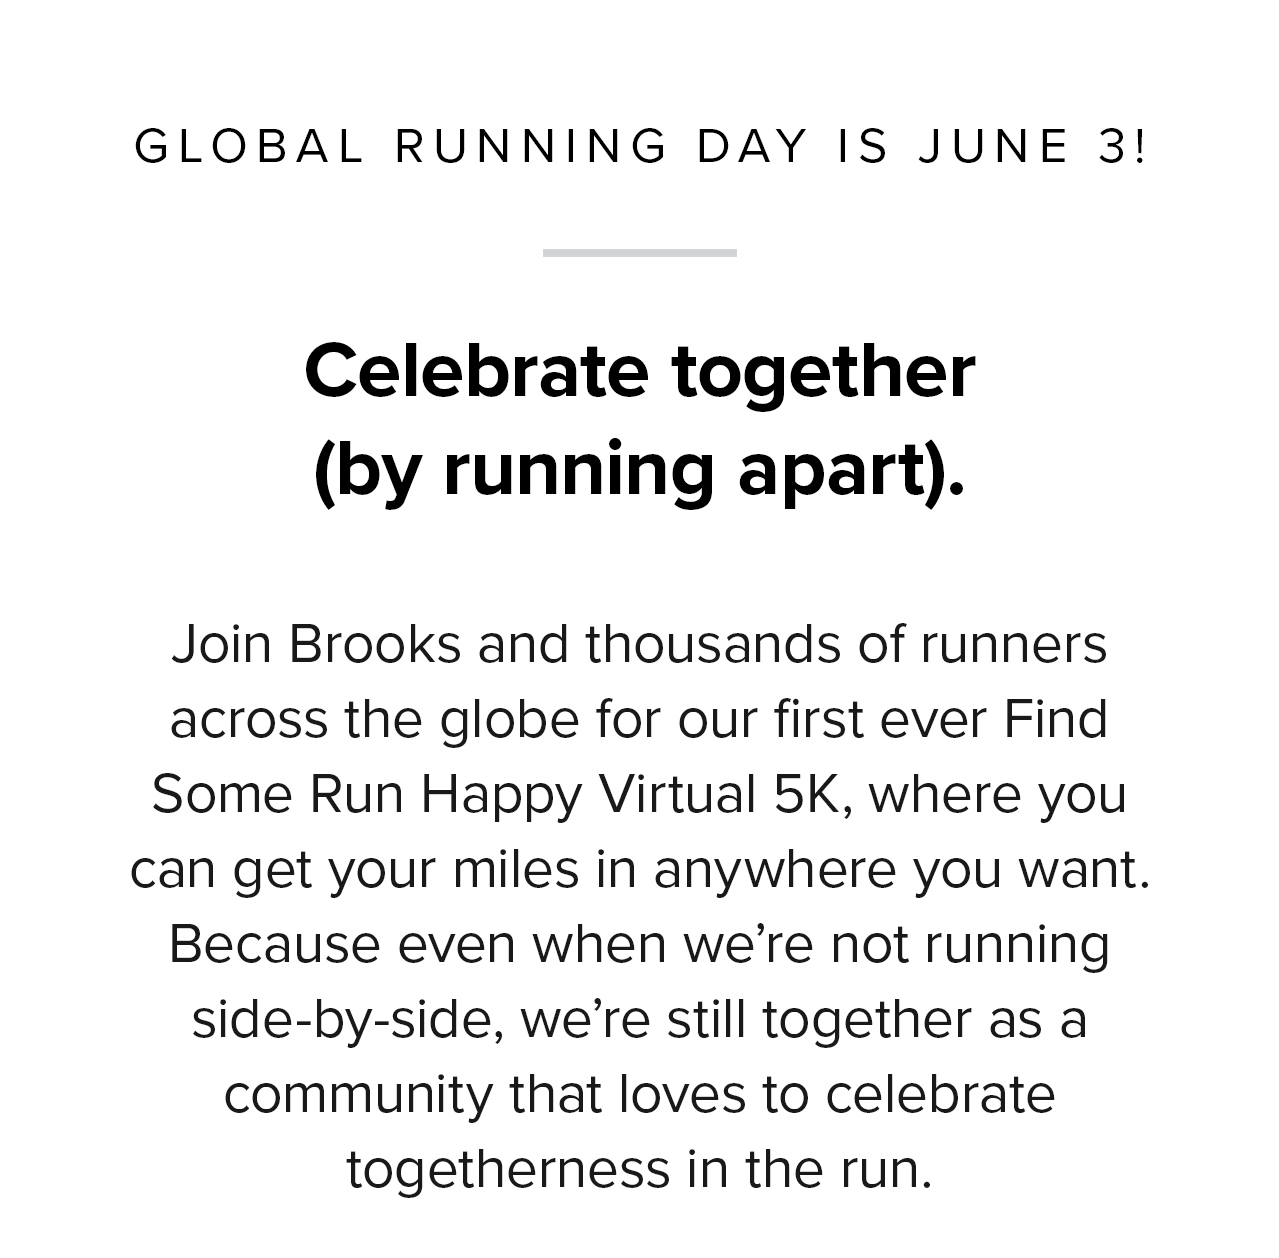 Celebrate together (by running apart). | Join Brooks and thousands of runners across the globe for our first ever Find Some Run Happy Virtual 5K. Because even when we''re not running side-by-side, we''re still together as a community that loves to celebrate togetherness in the run.